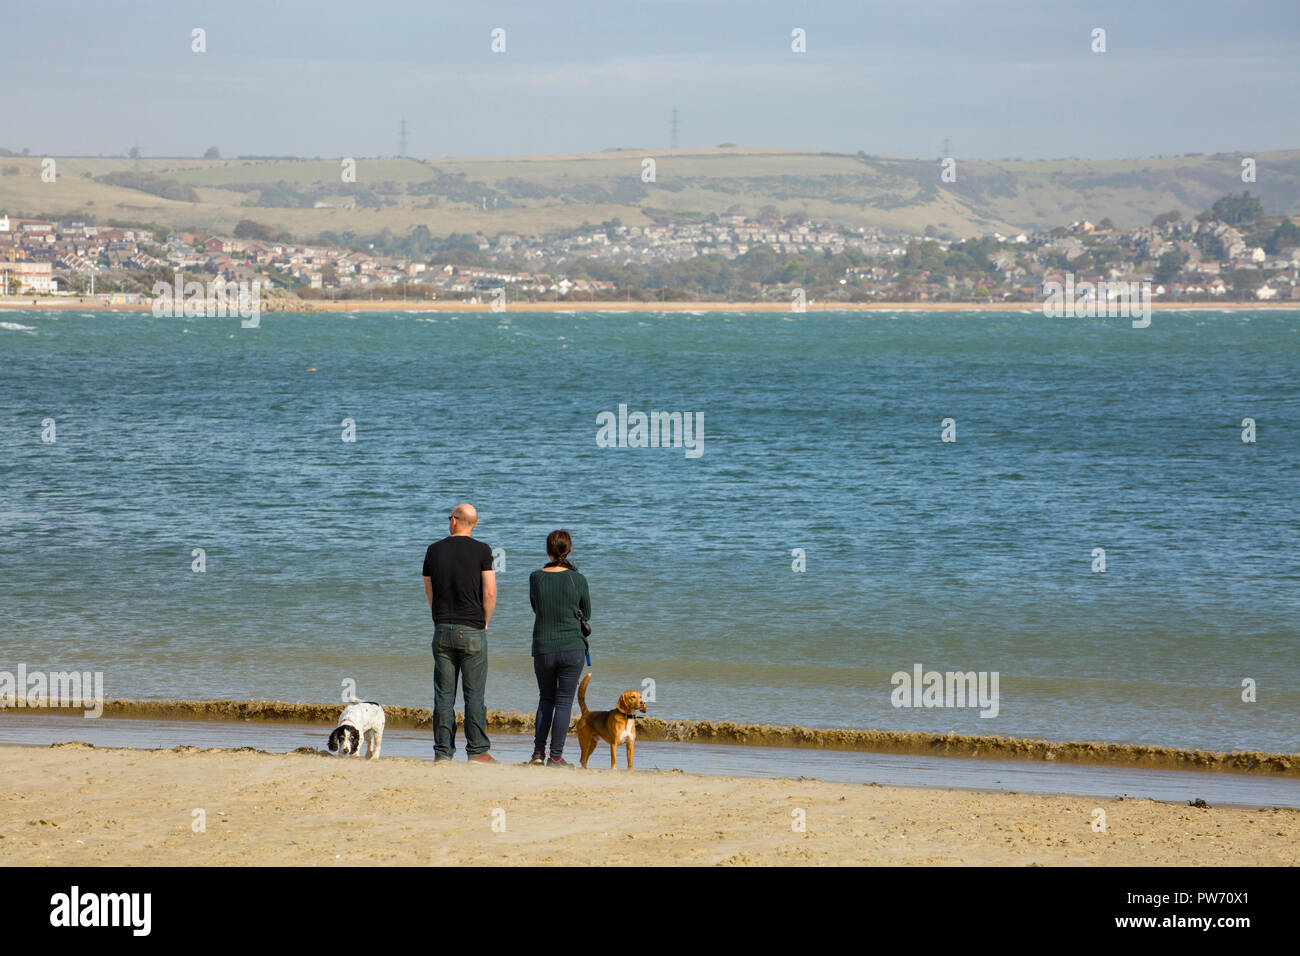 Two people with dogs sheltered from the wind on Weymouth beach during Storm Callum. Weymouth Dorset England UK GB 13.10.2018 Stock Photo